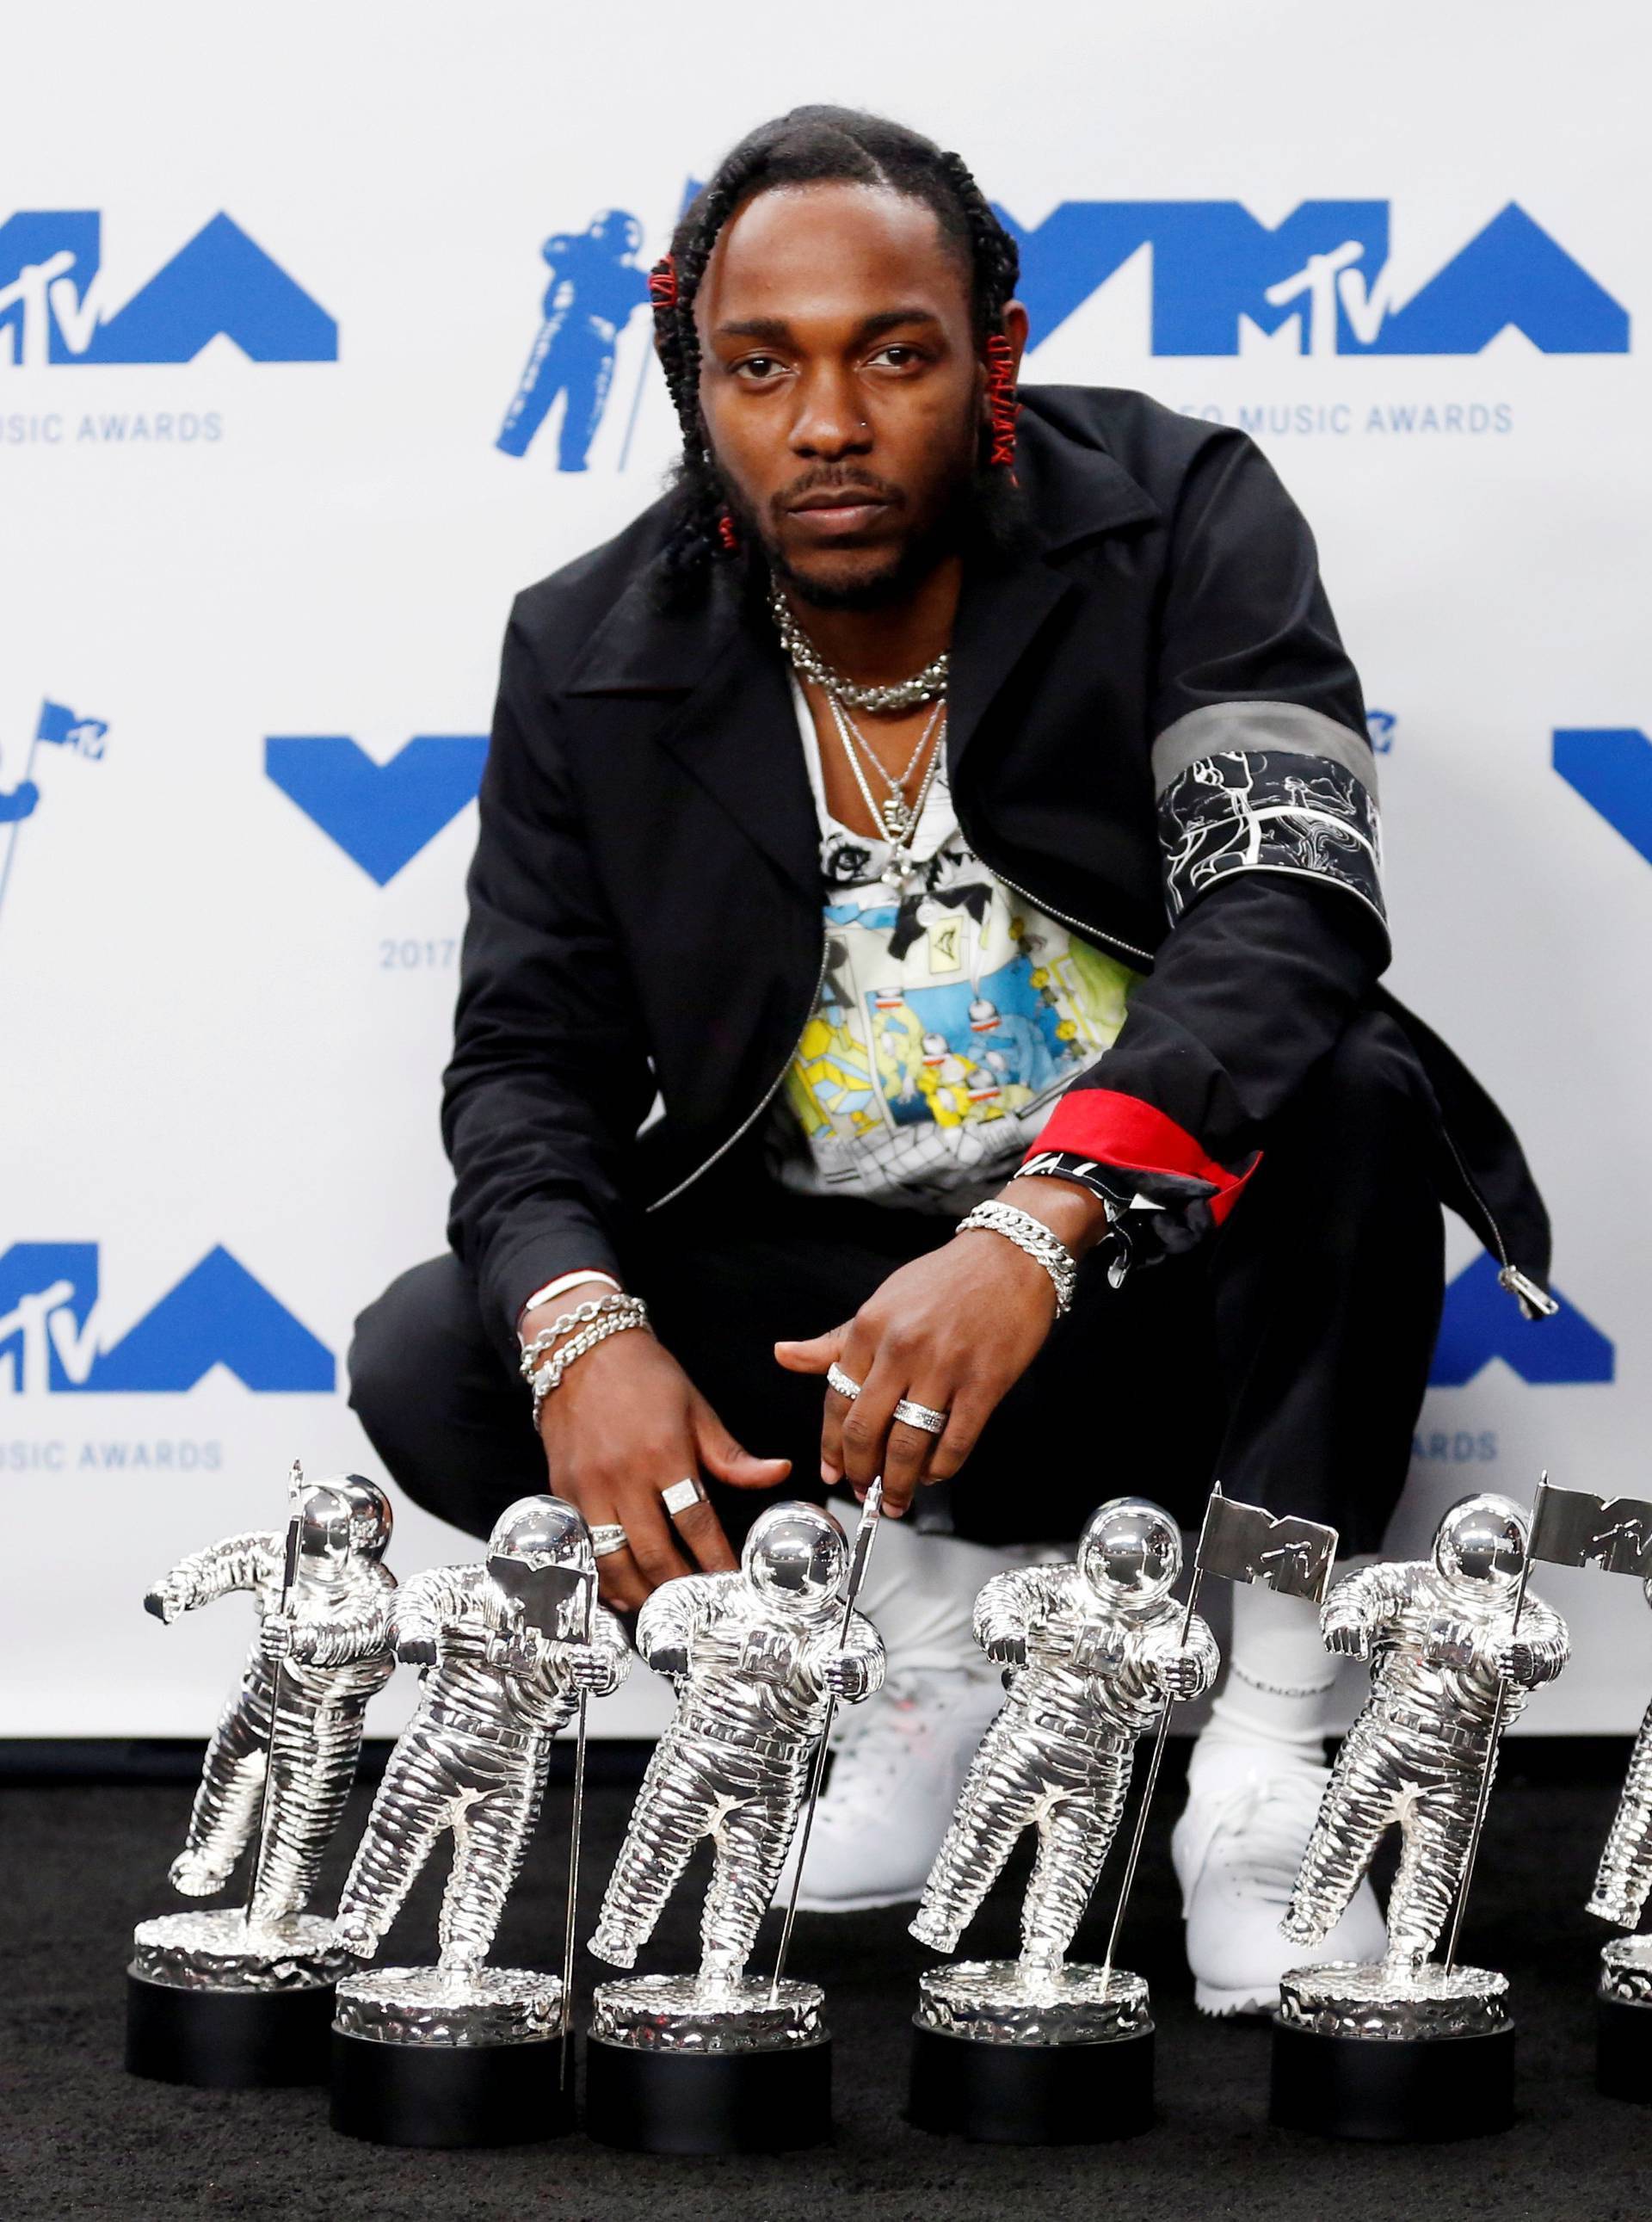 FILE PHOTO: Musician Kendrick Lamar poses for pictures with his awards at the 2017 MTV Video Music Awards in Inglewood